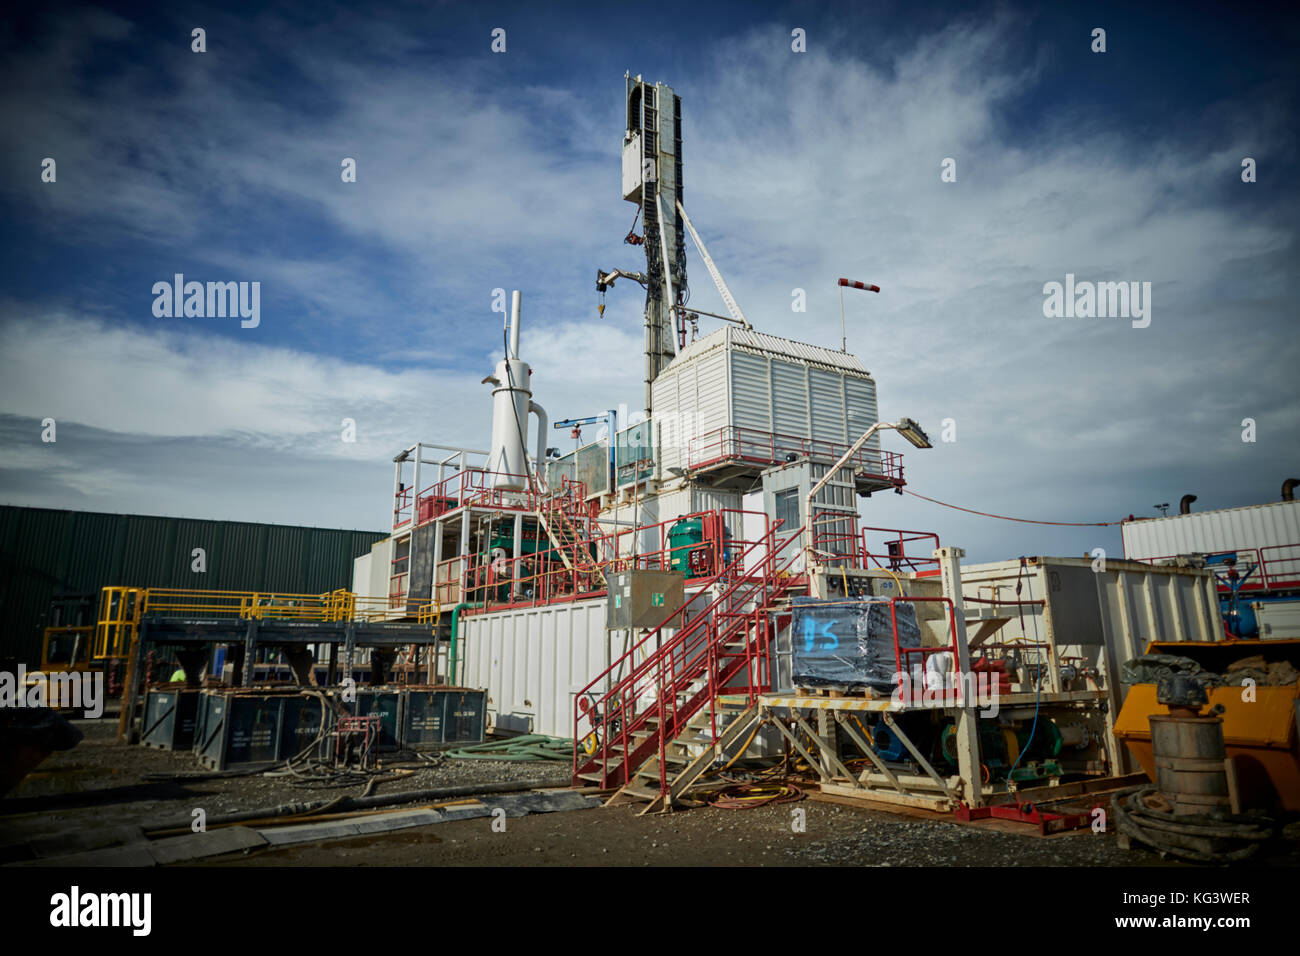 Fracking firm Cuadrilla drilling for shale gas in Lancashire, pictured the drilling rig Stock Photo